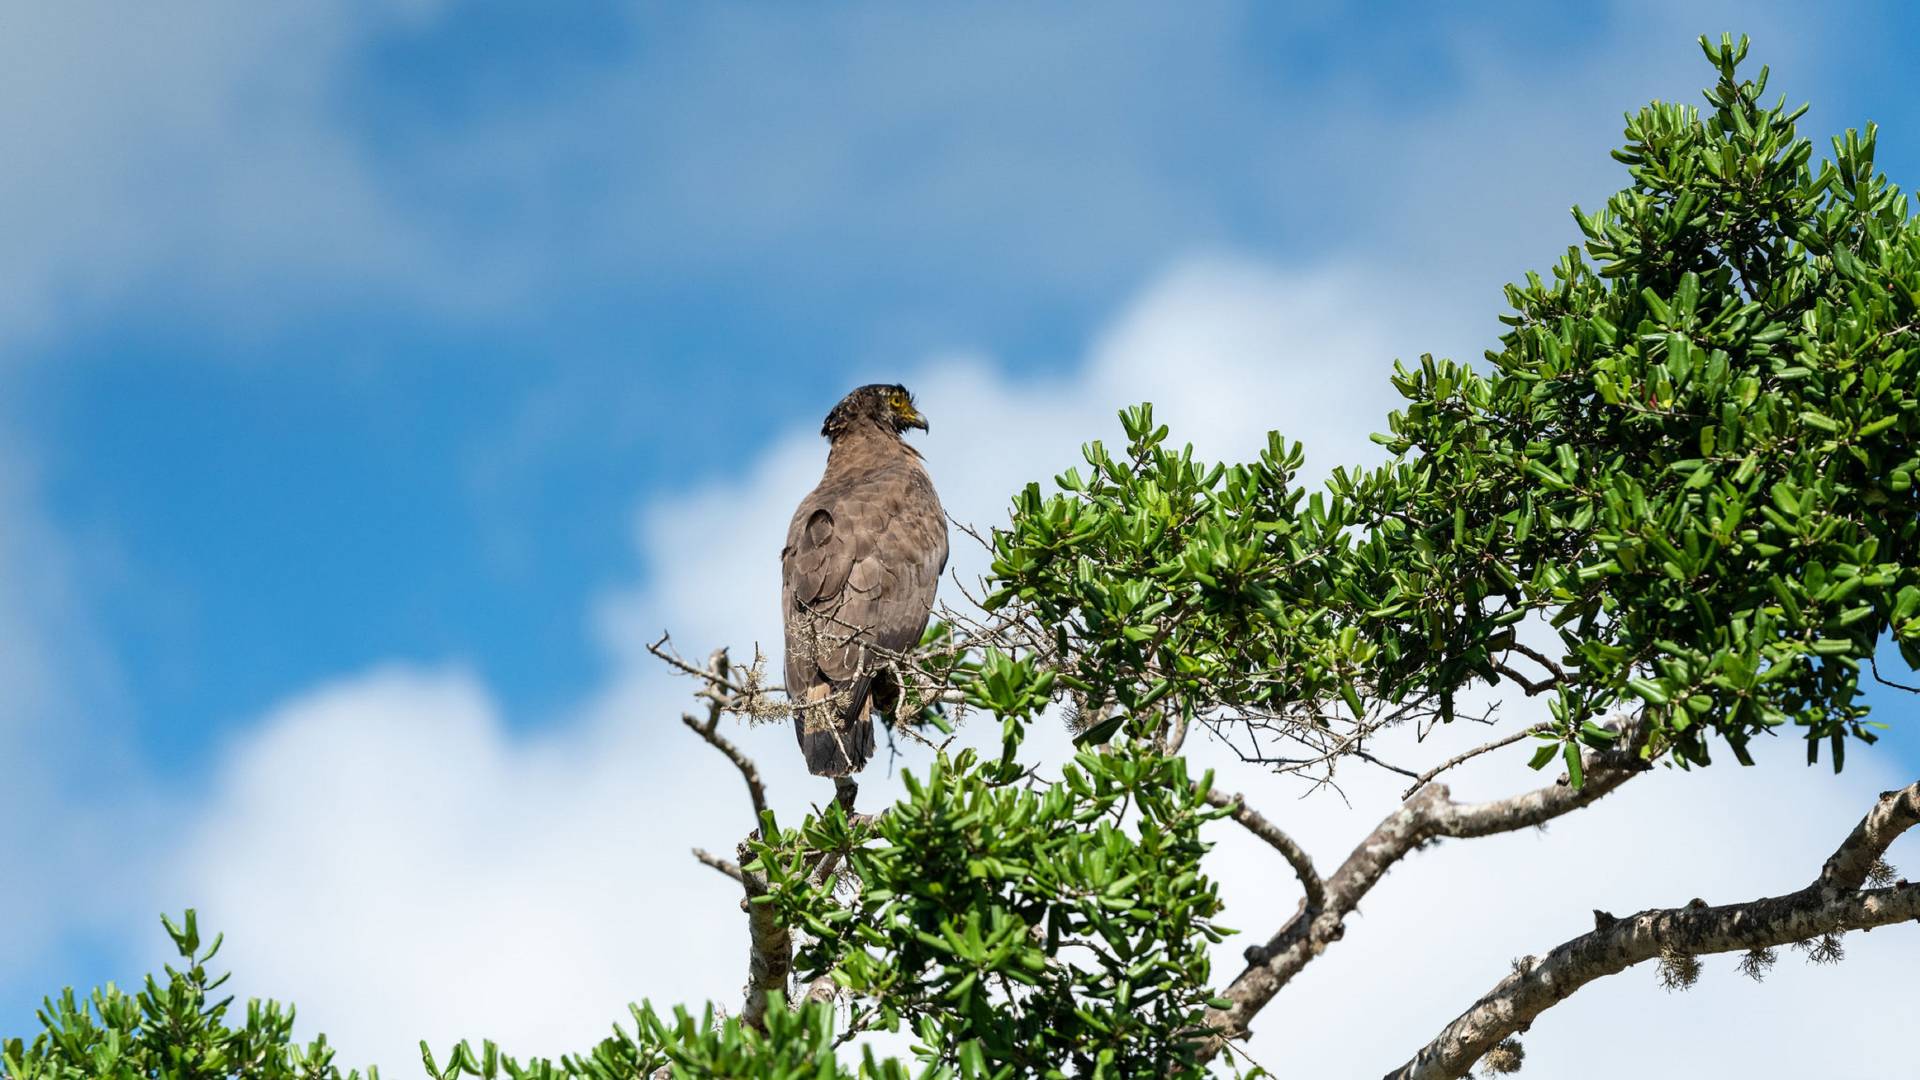 Closeup of buzzard resting on branch in treetop